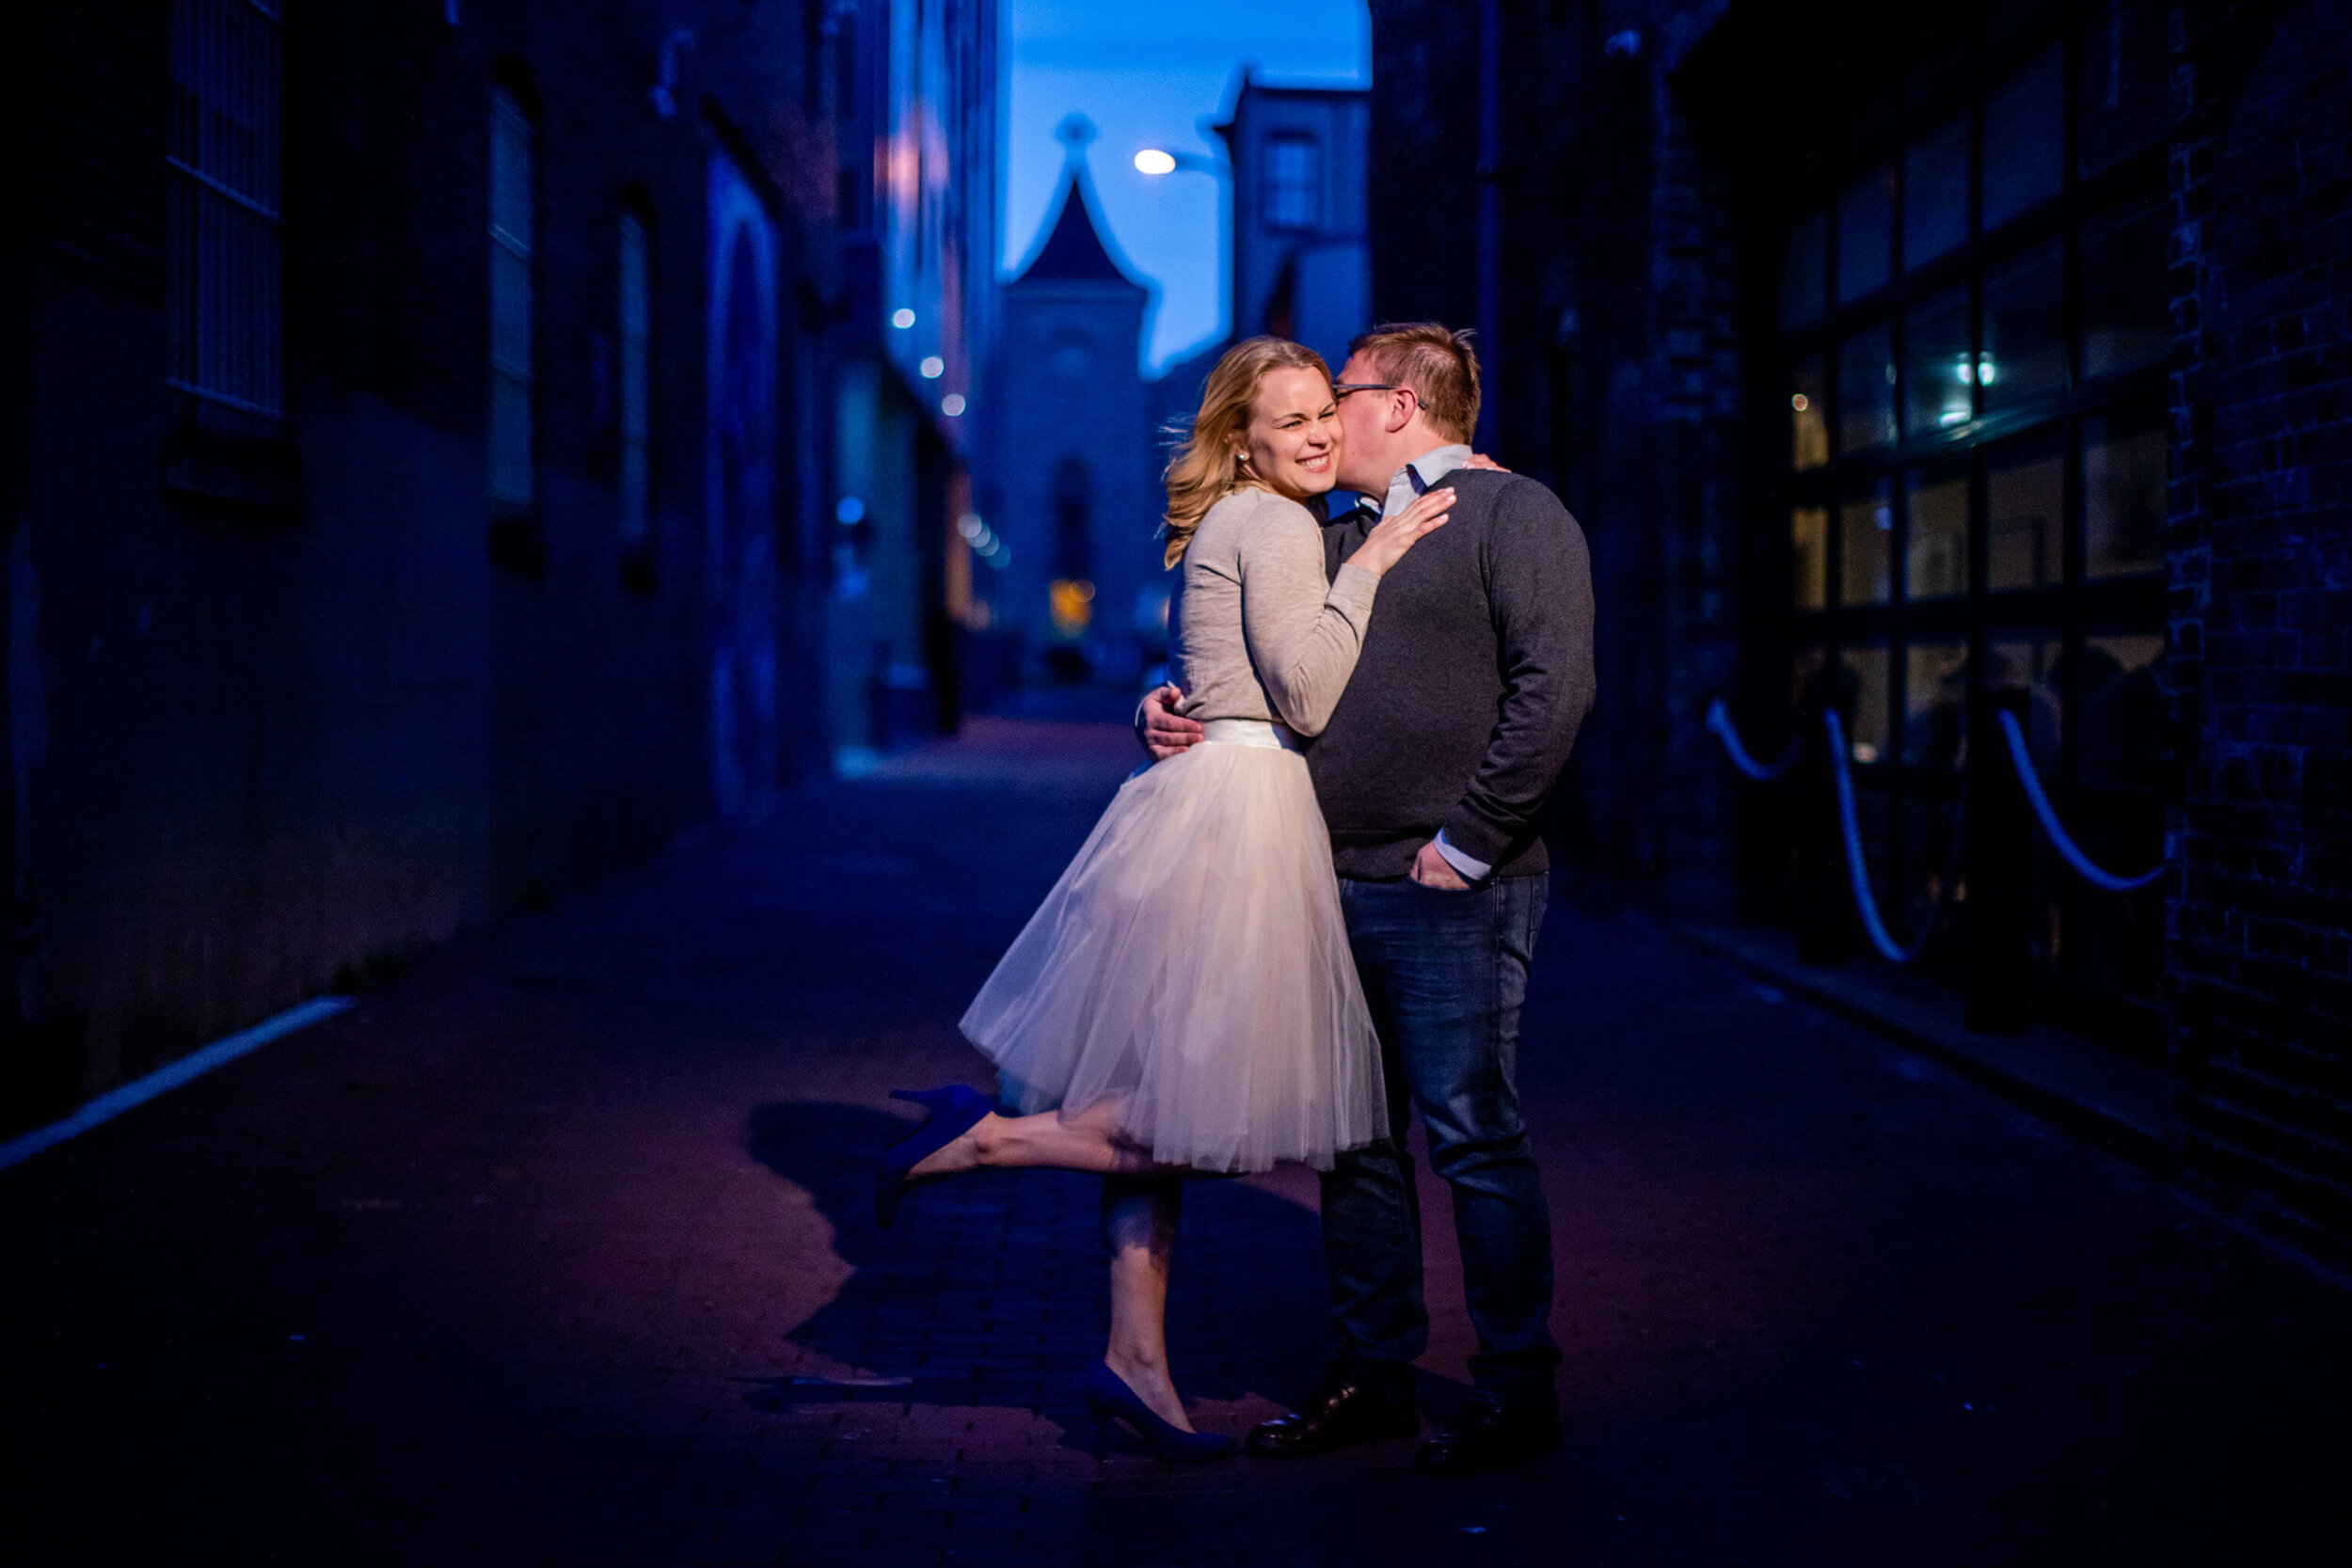 33-blagden-alley-engagement-session-pink-tutu-sunset-washington-dc-photography-by-bee-two-sweet.jpg